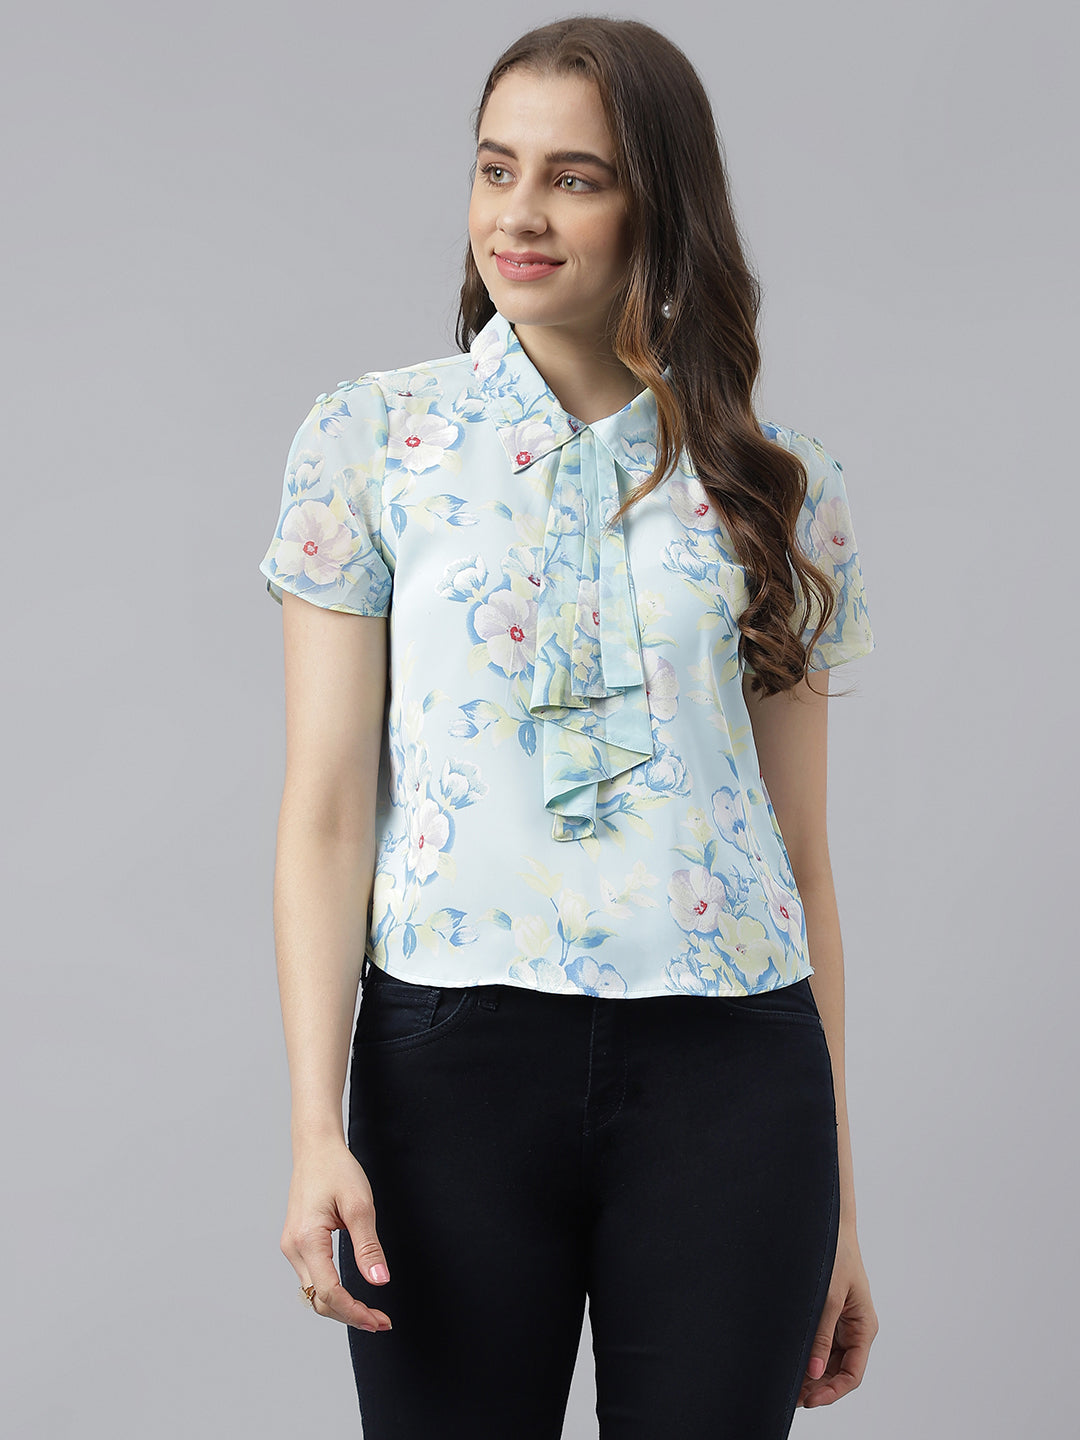 Blue Floral Printed Cap Sleeves Shirt Top With Tie Up Neck